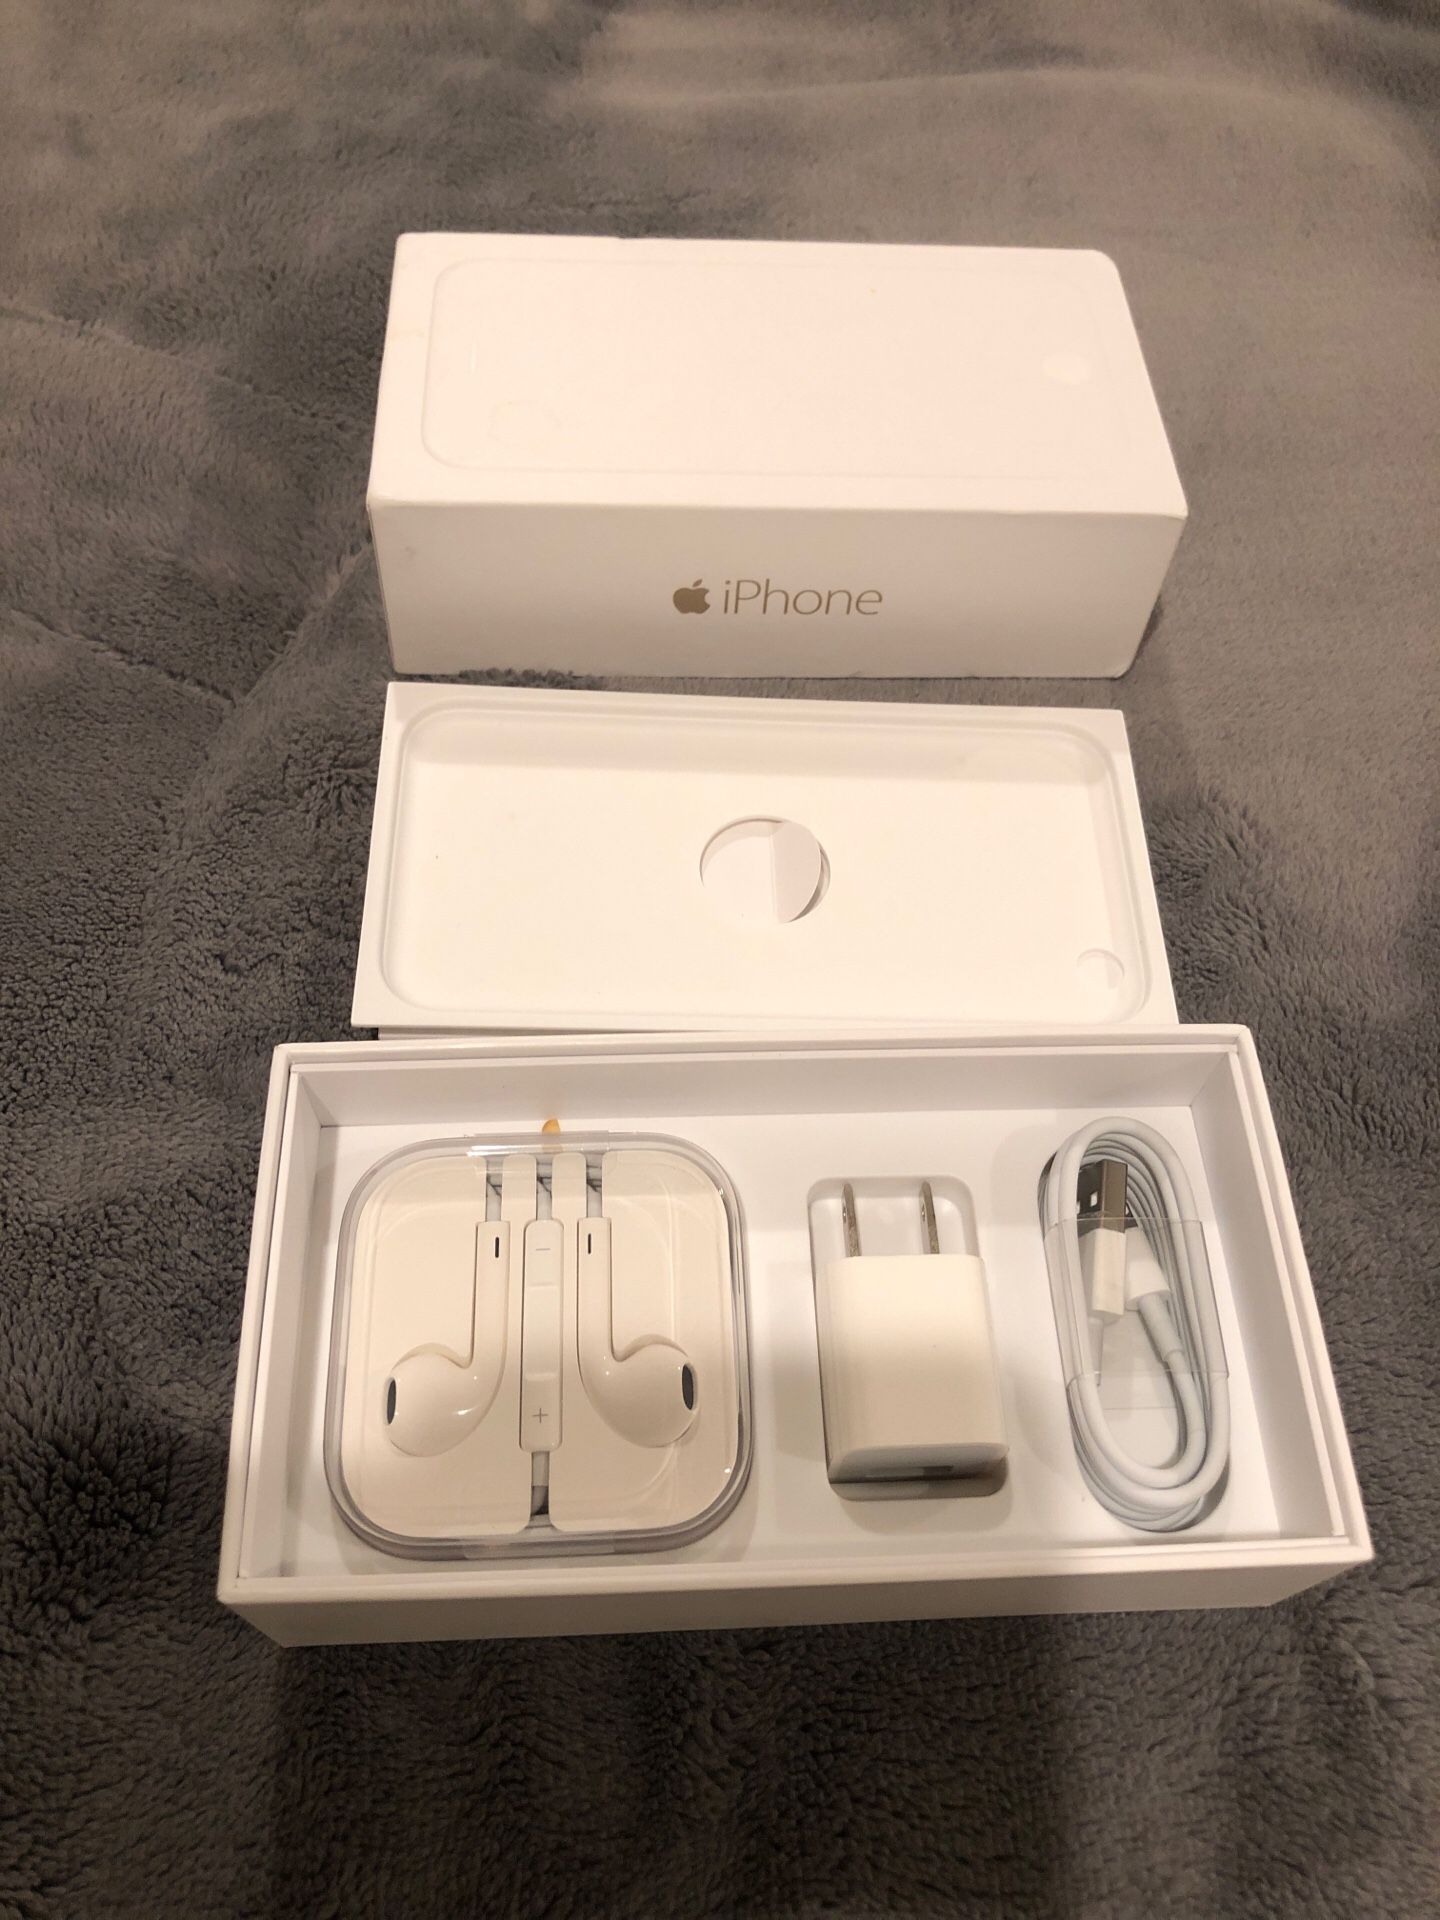 iPhone 6 box and acessories